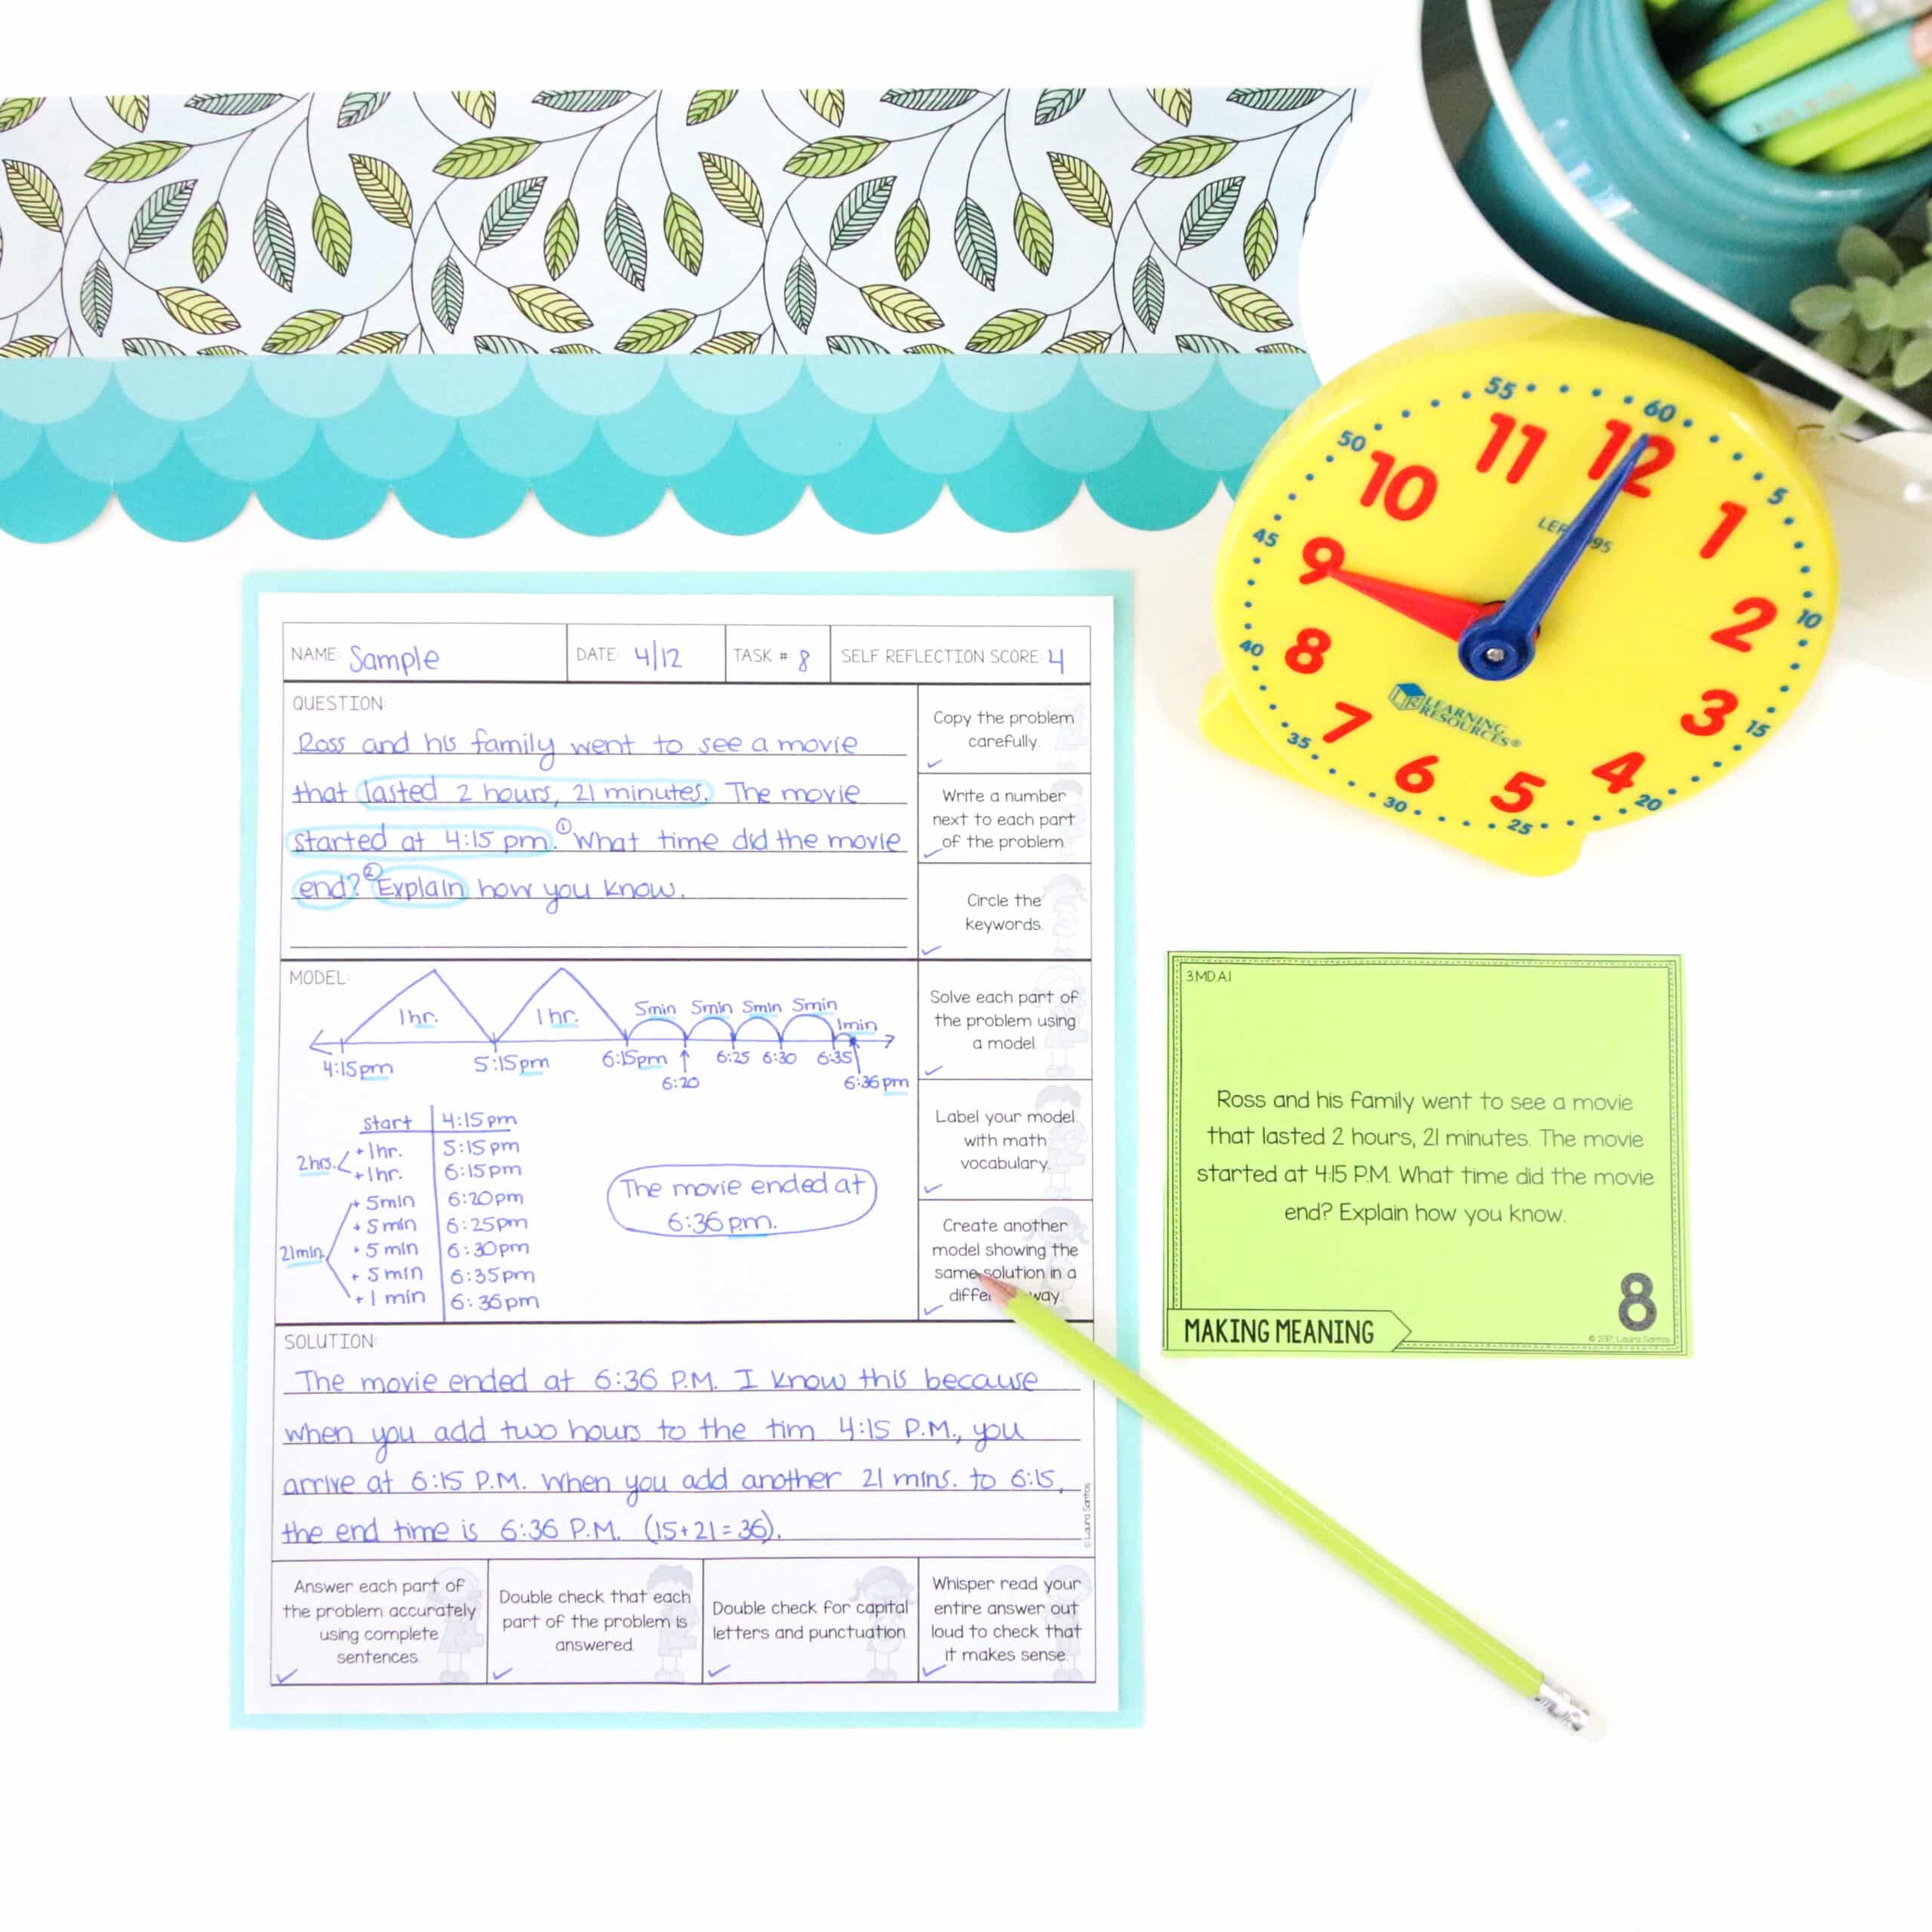 Telling time and elapsed time practice word problem task card next to completed word problem recording sheet with scaffolding prompts on margin. 